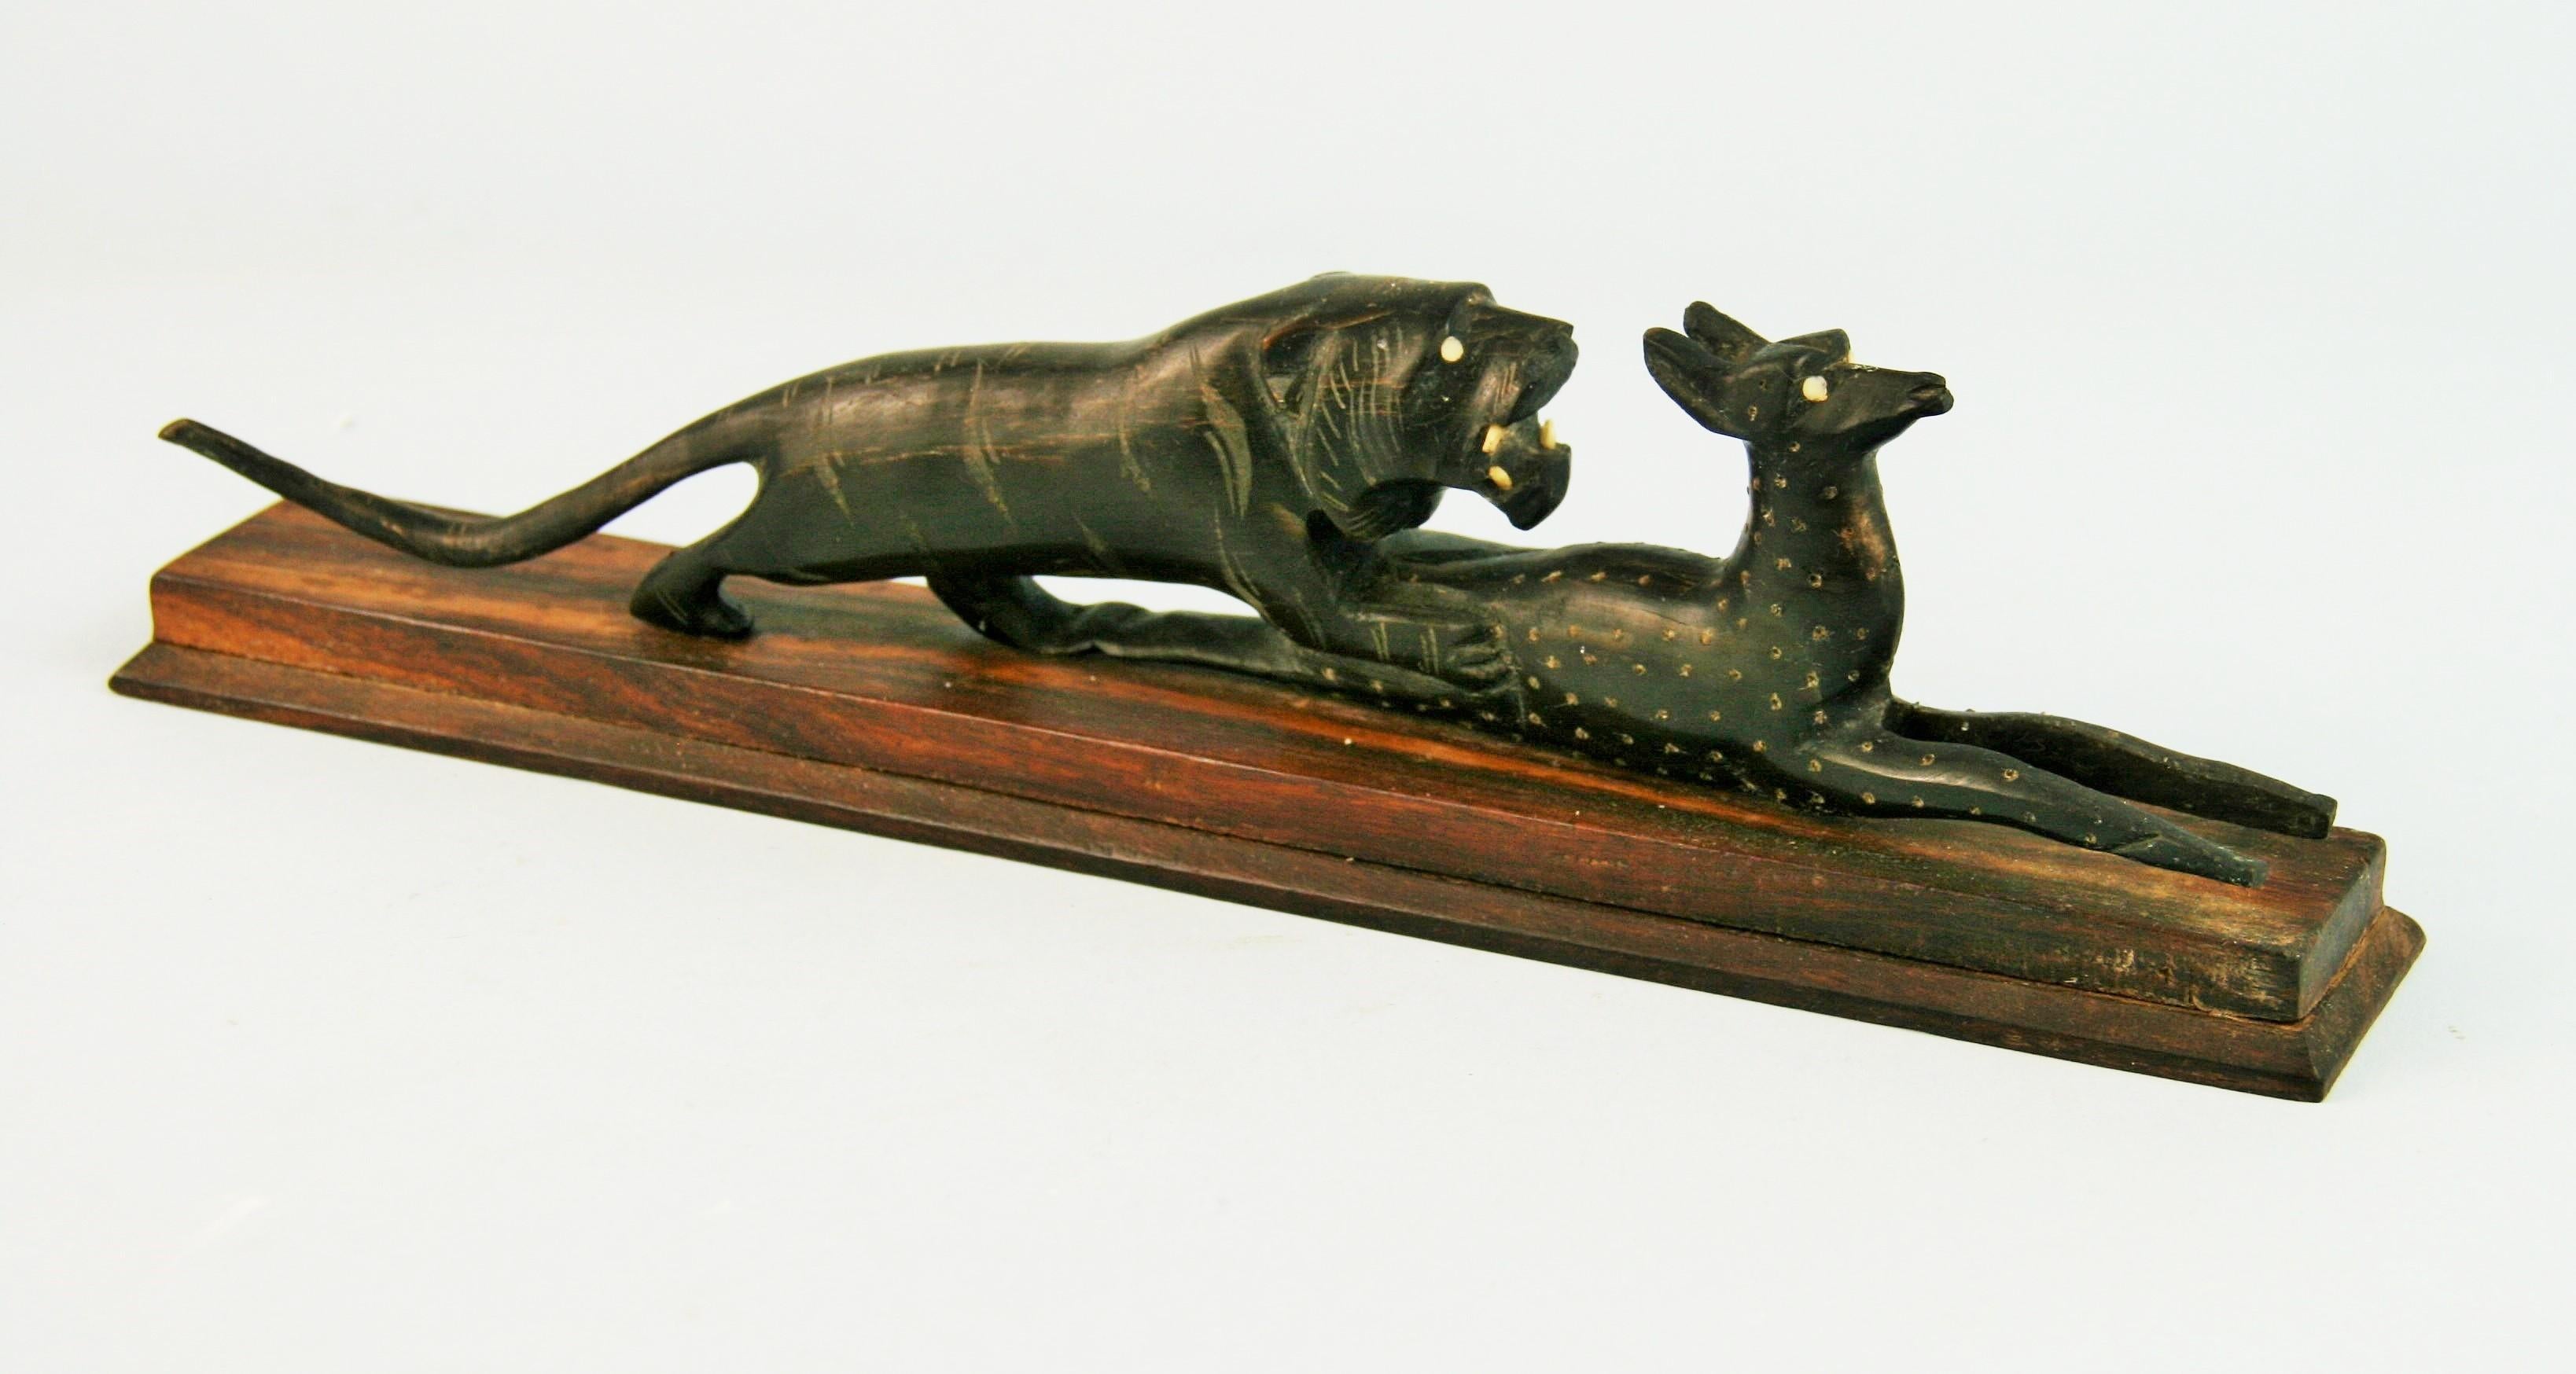 3-541  Japanese Art Deco Folk Art hand carved sculpture of a lioness and its gazelle prey.